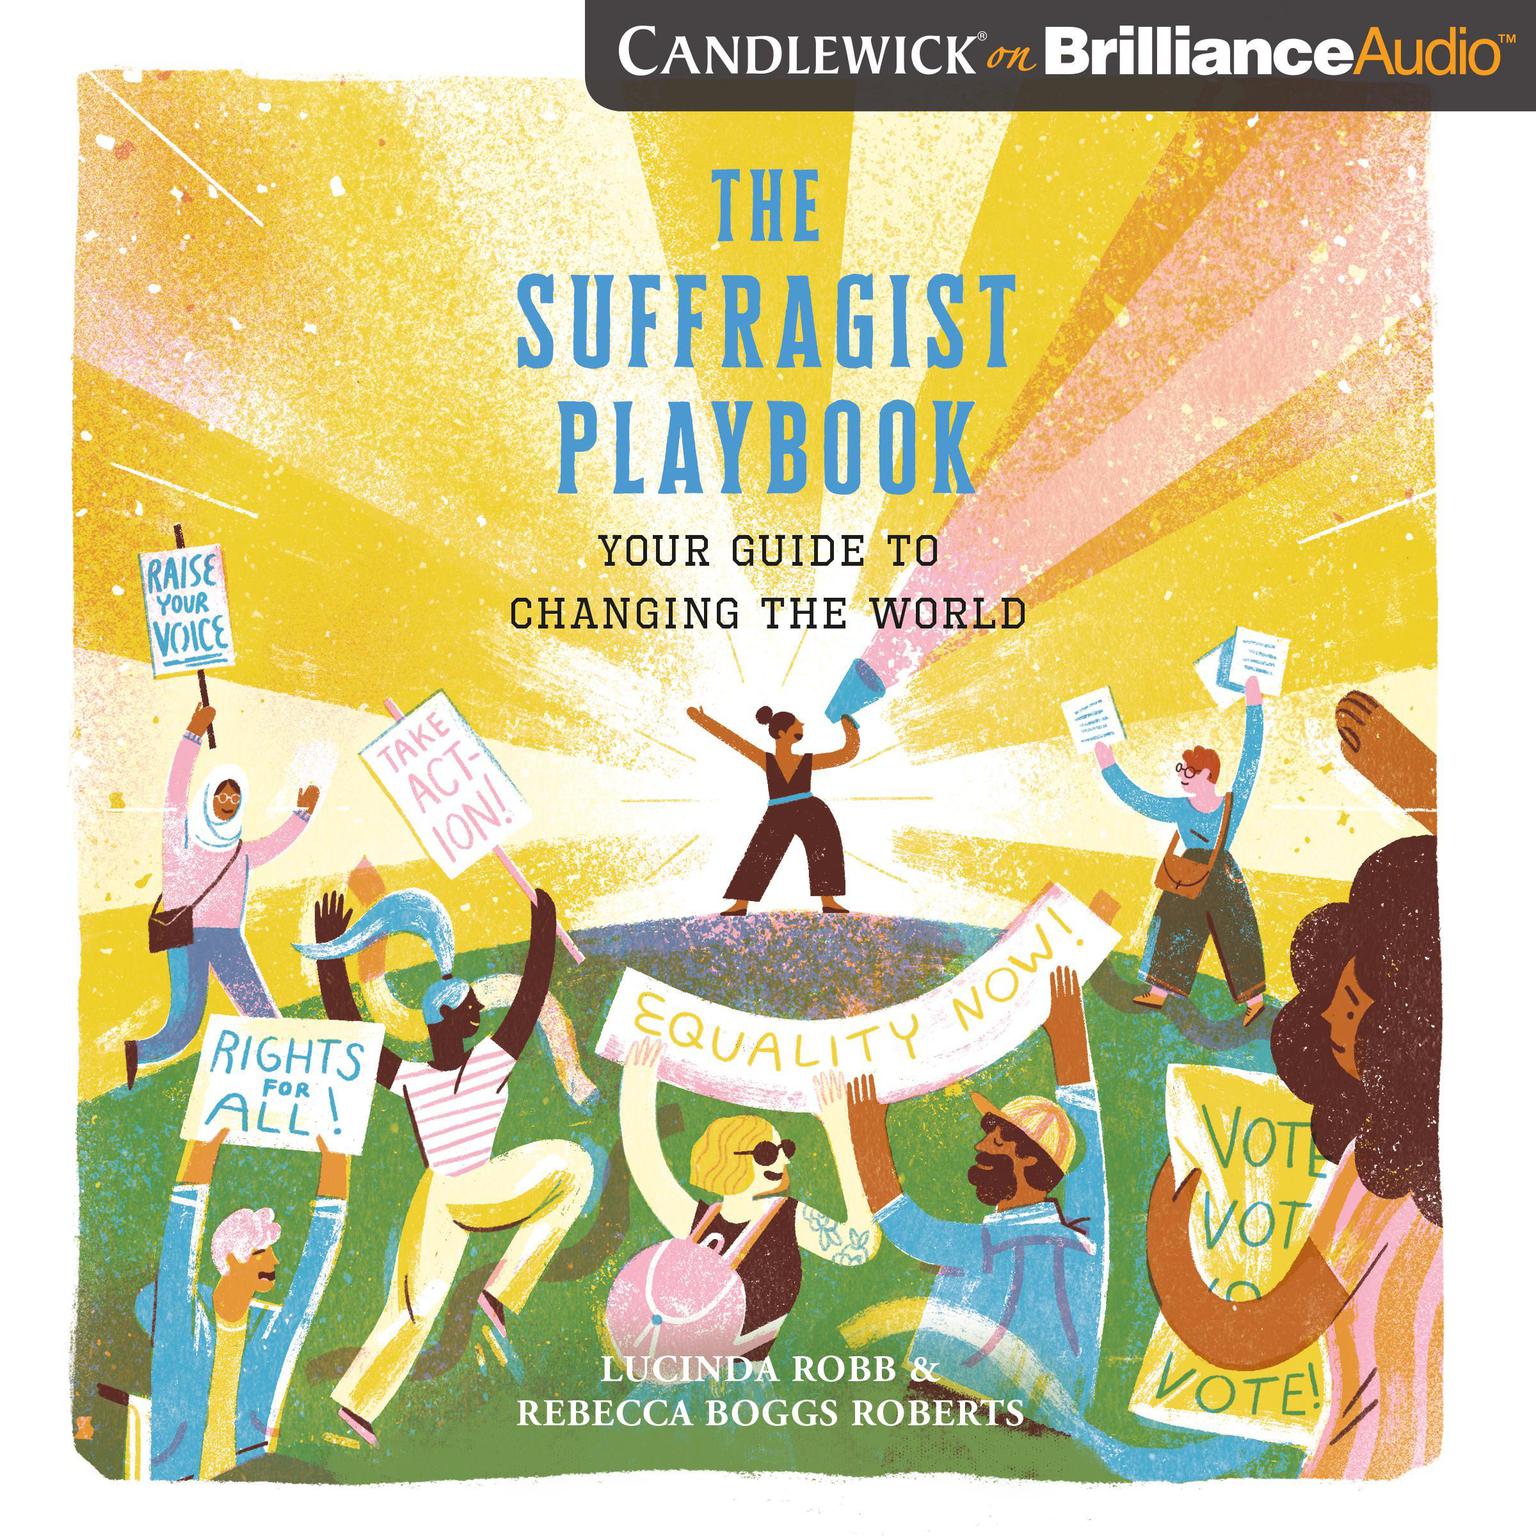 The Suffragist Playbook: Your Guide to Changing the World Audiobook, by Lucinda Robb